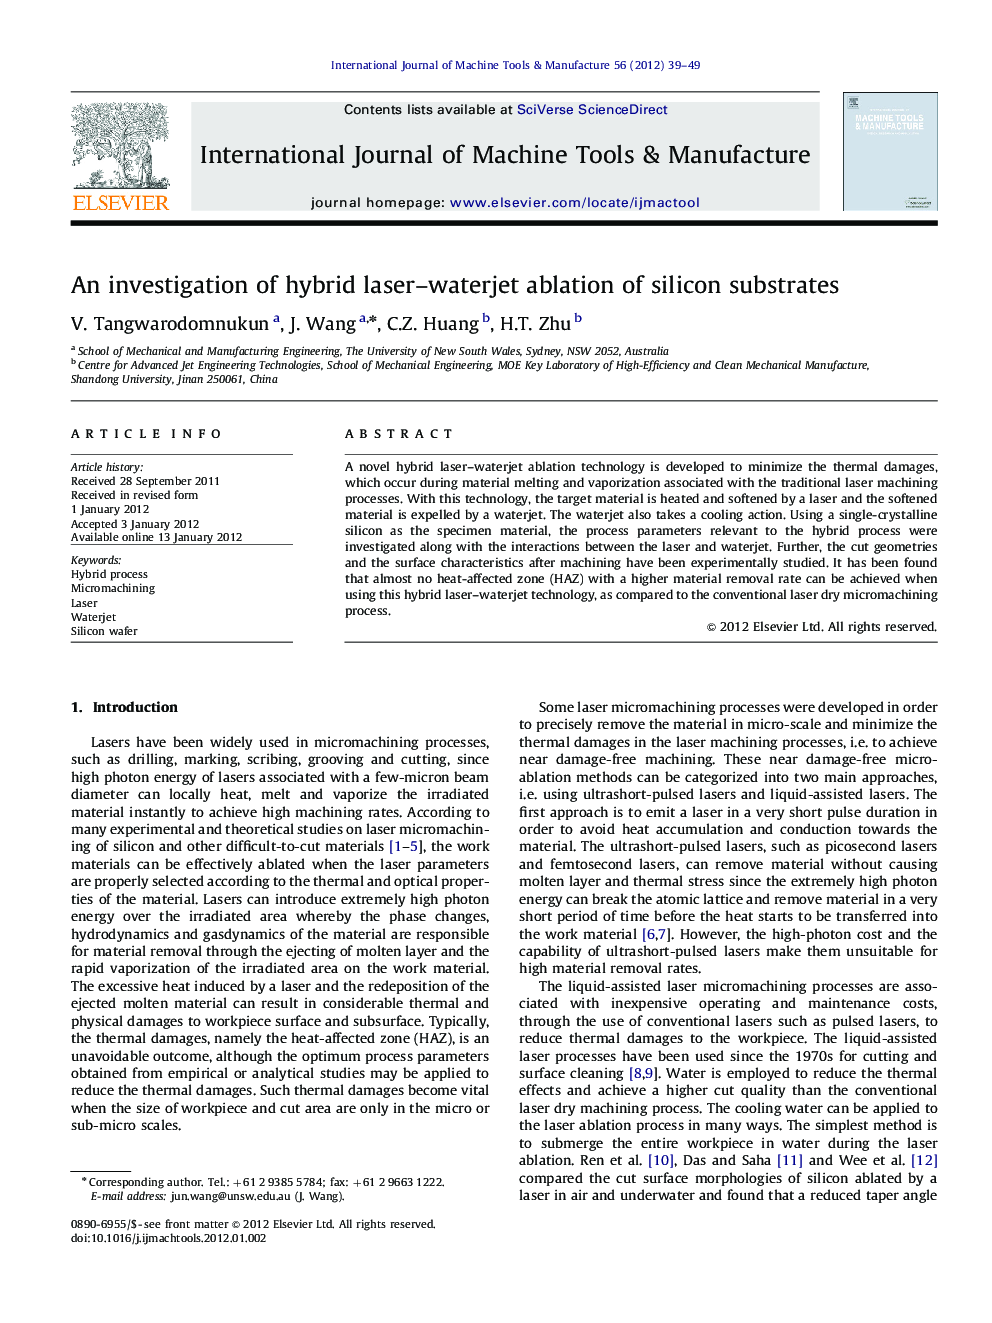 An investigation of hybrid laser-waterjet ablation of silicon substrates